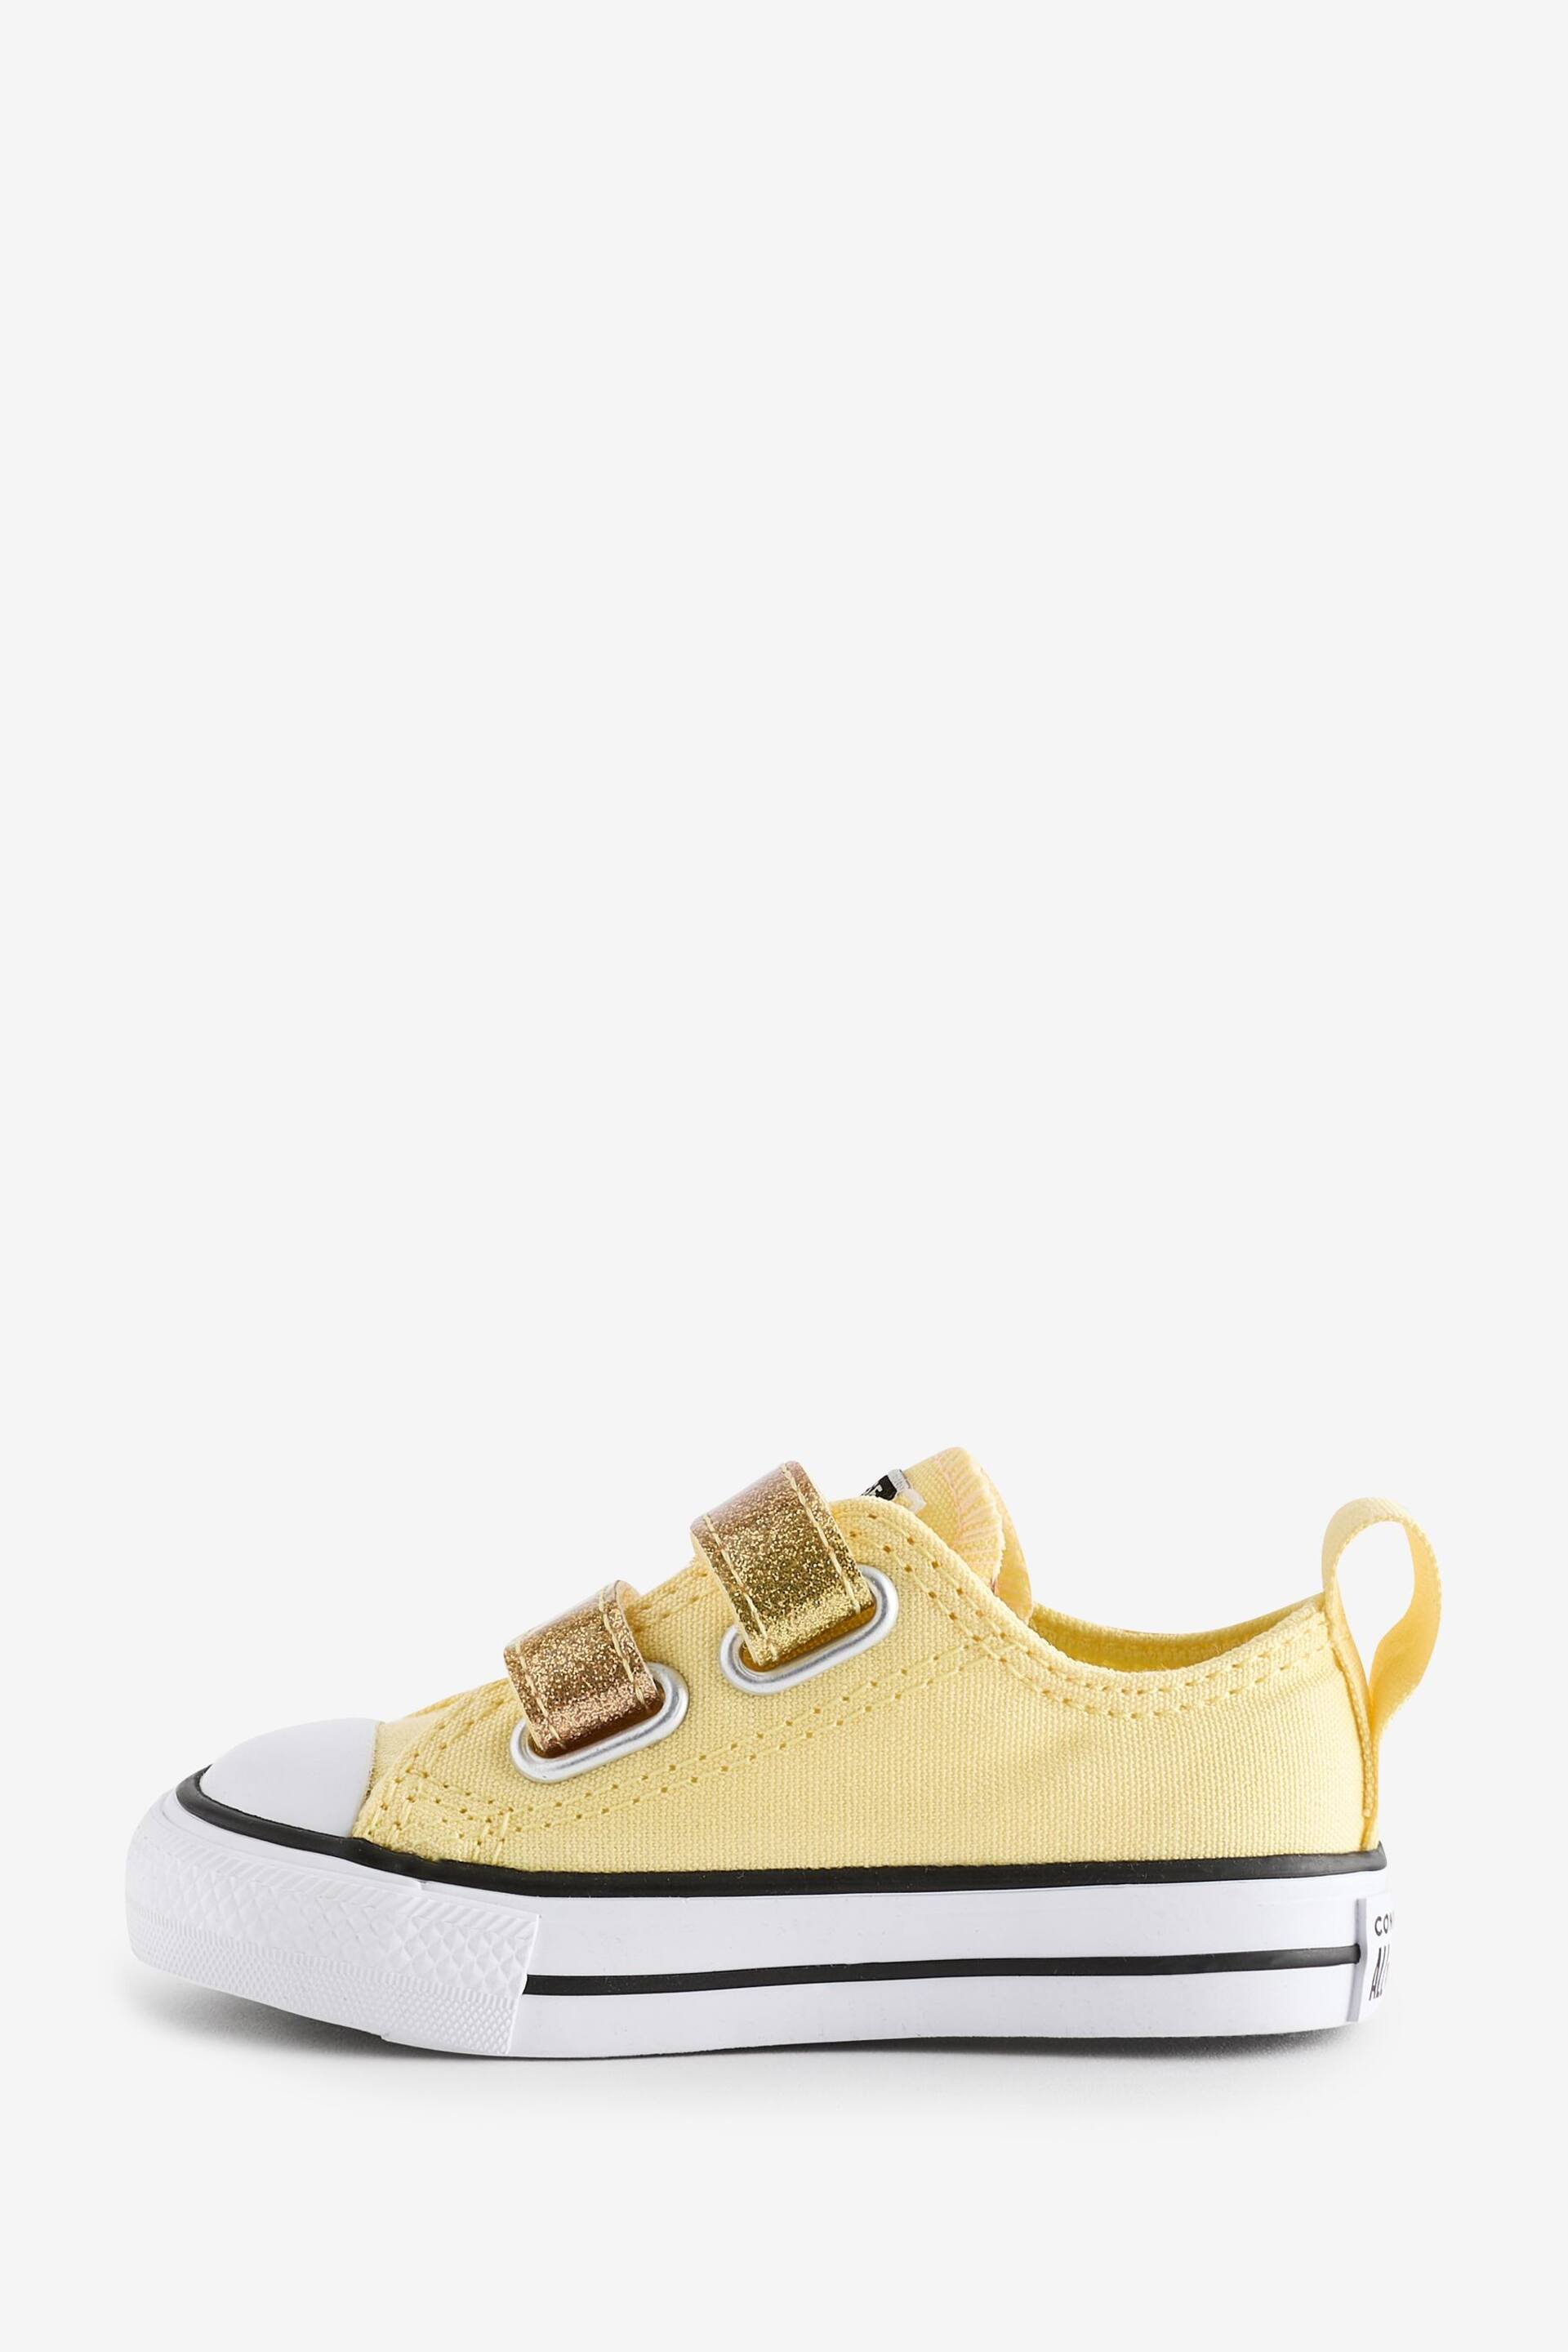 Converse Yellow Lemon Infant 2V Trainers - Image 2 of 9